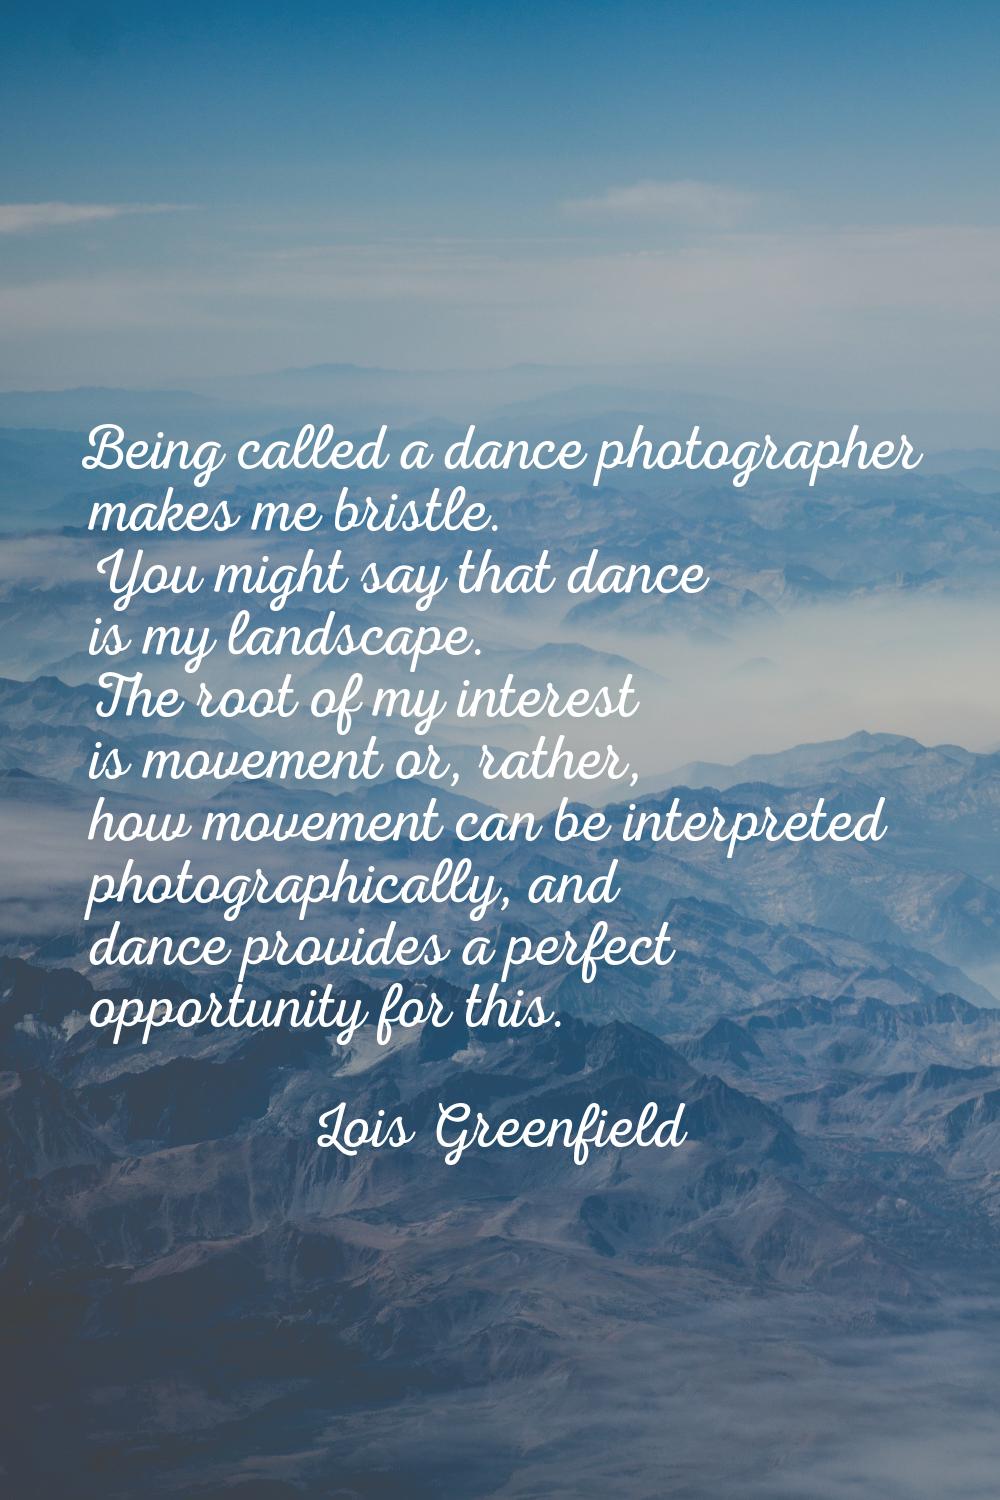 Being called a dance photographer makes me bristle. You might say that dance is my landscape. The r